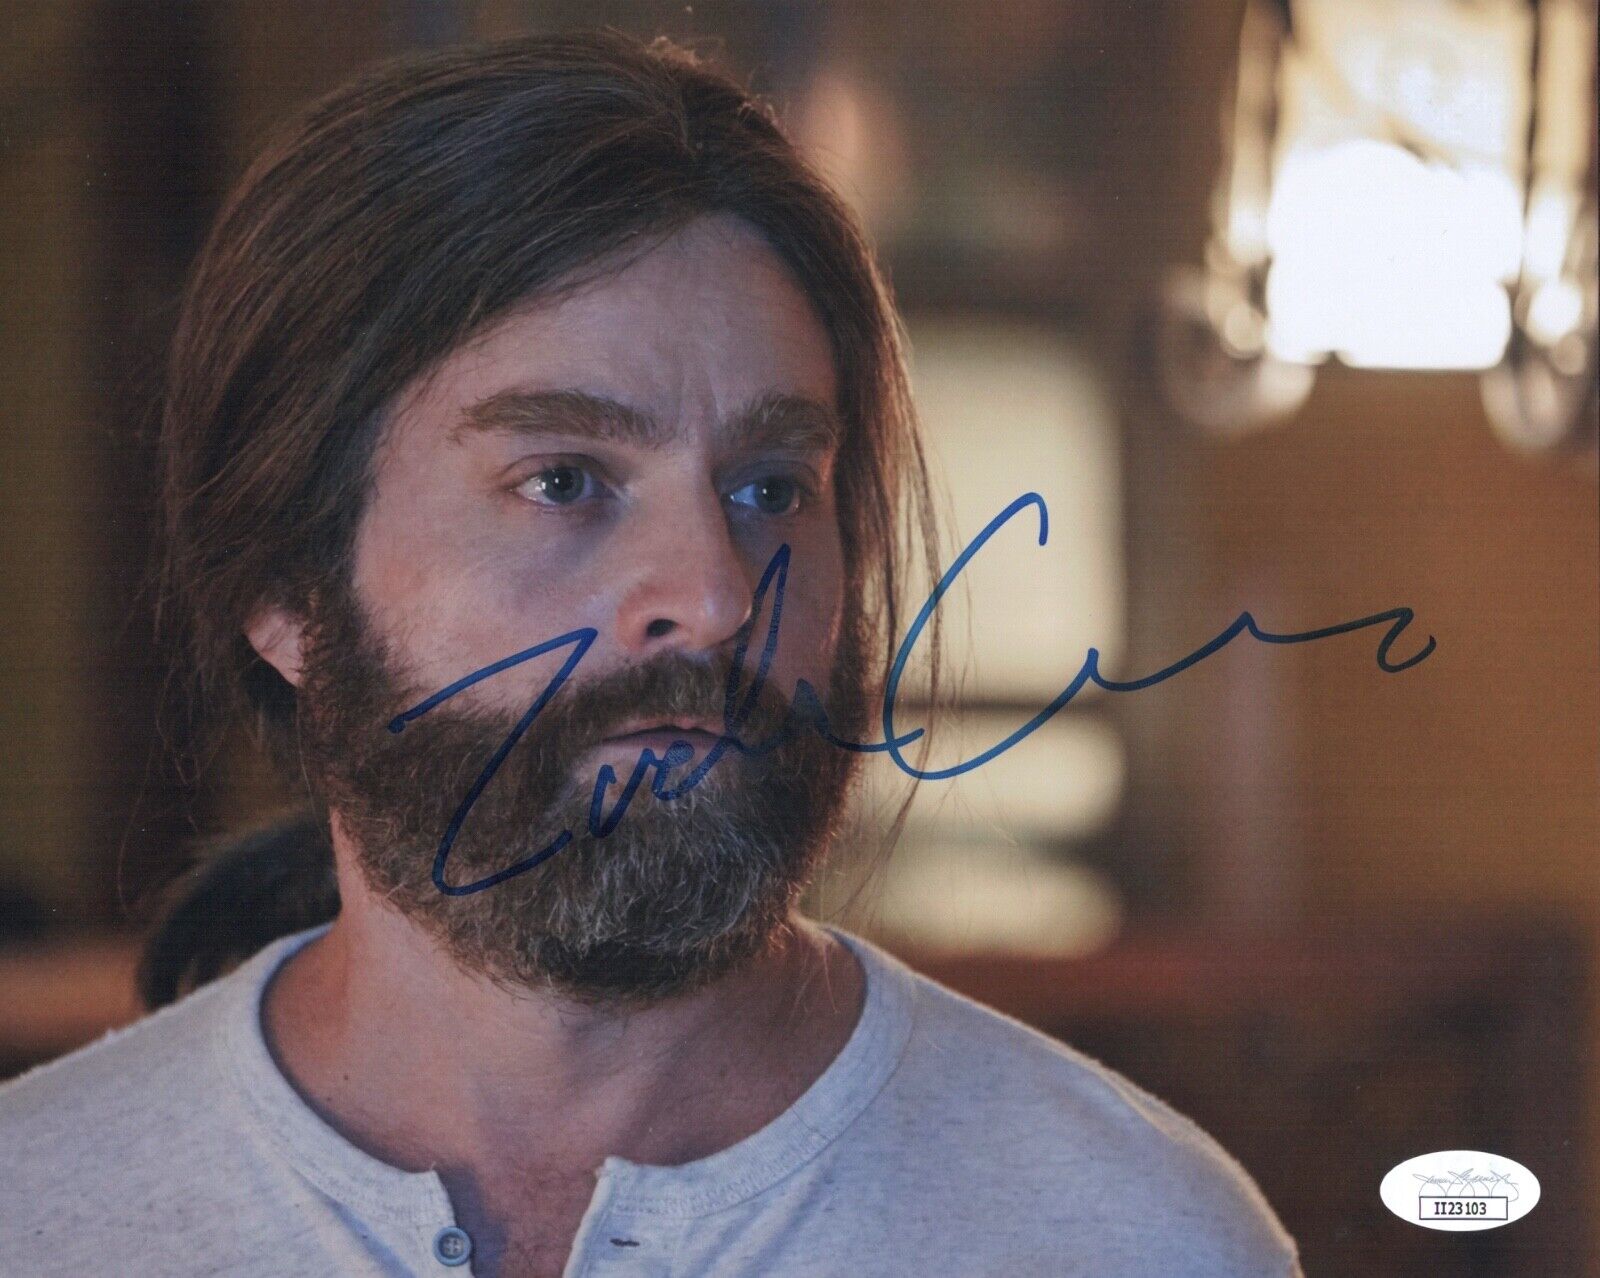 Zach Galifianakis Signed 8x10 Photo Poster painting BASKETS In Person Autograph JSA COA Cert